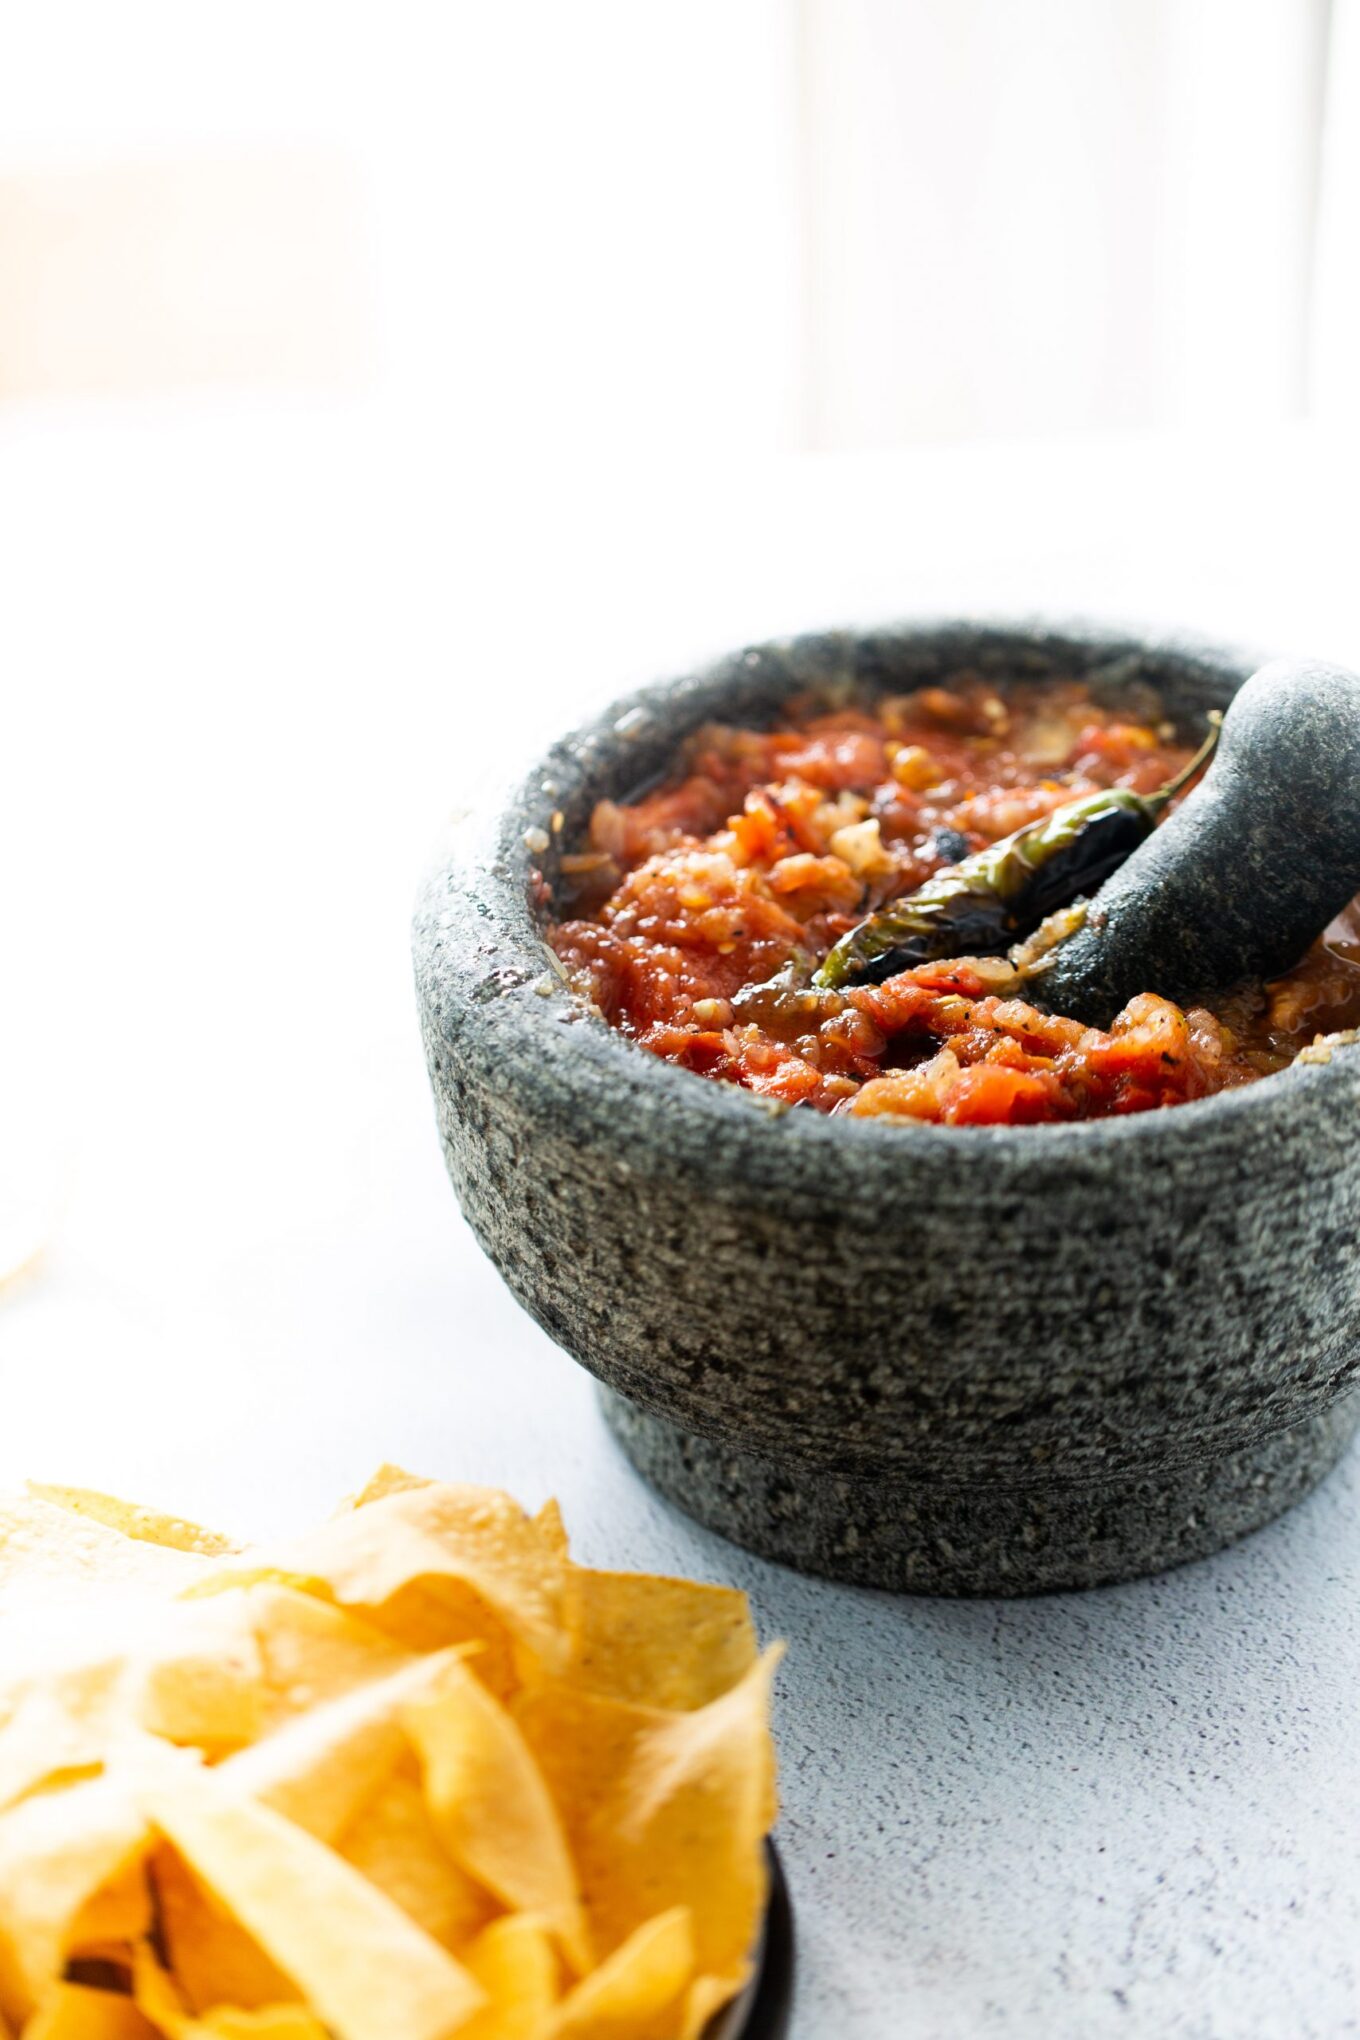 Red salsa served in a molcajete.